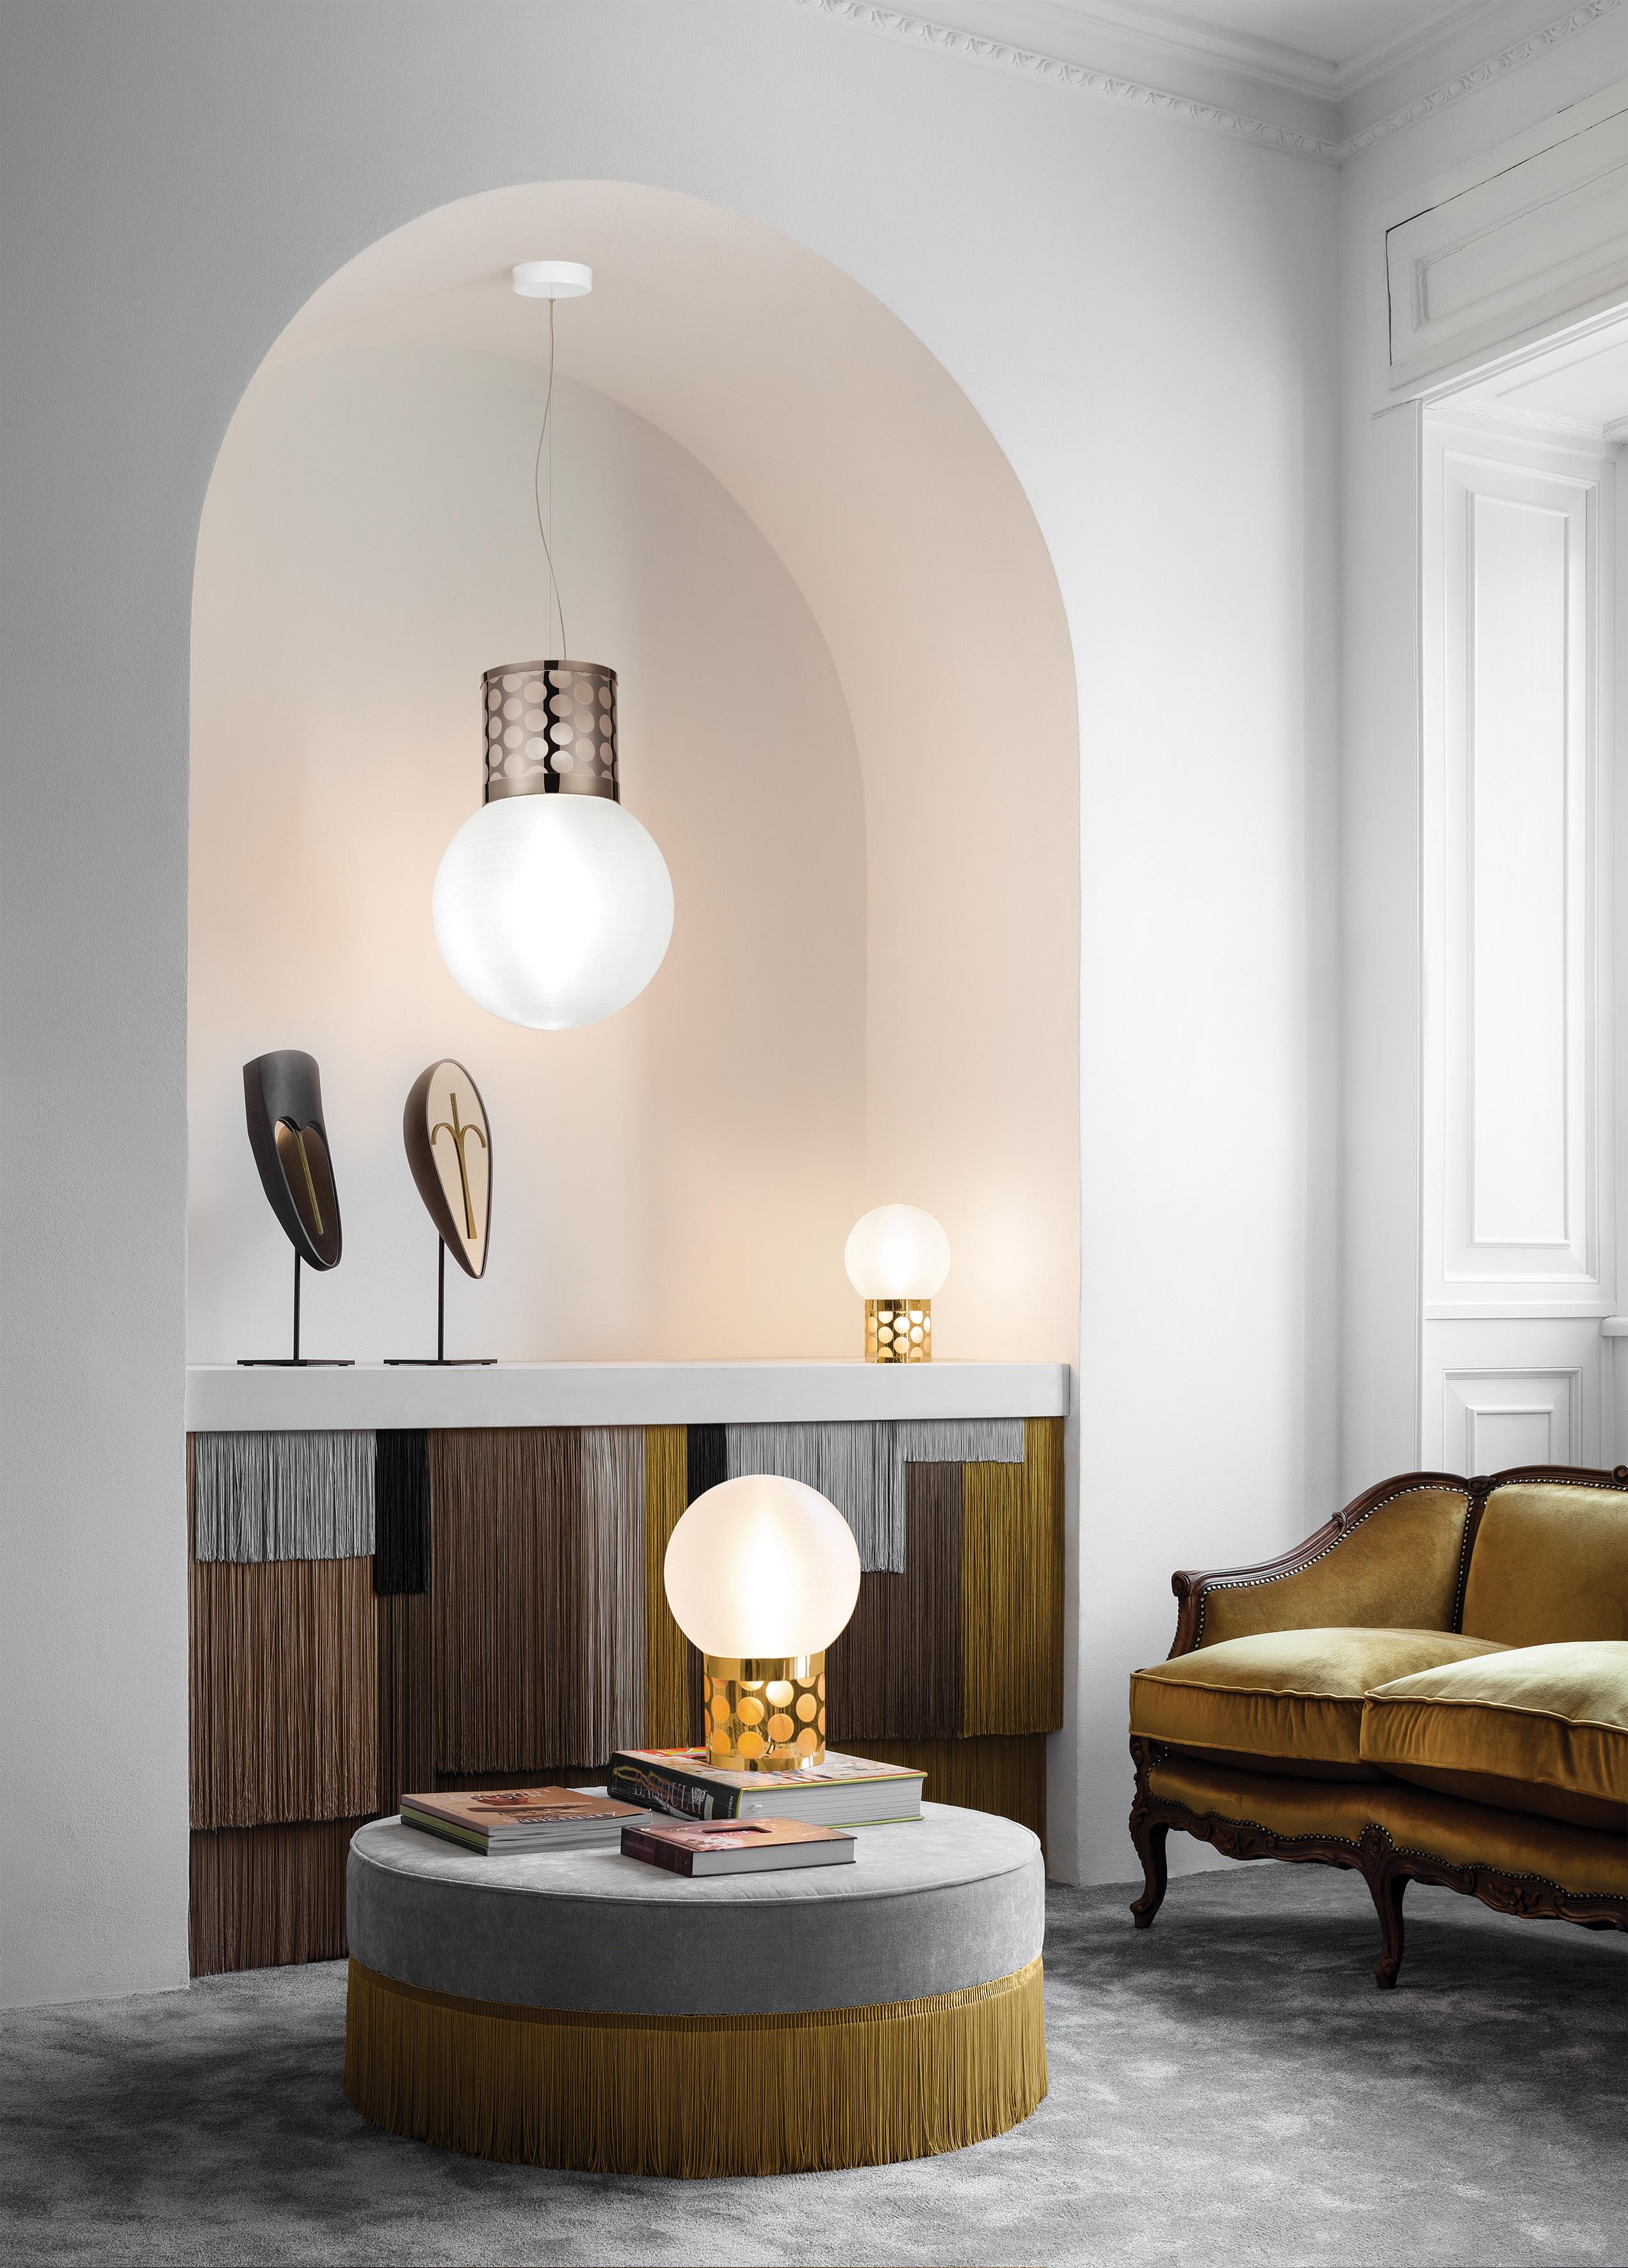 Atmosfera lies at the apex of fashion and design, where light melds into fabric. The new collection of table lamps are available in 2 sizes, and displays superimposed techno polymer layers create a polkadot effect. The lamps have independent